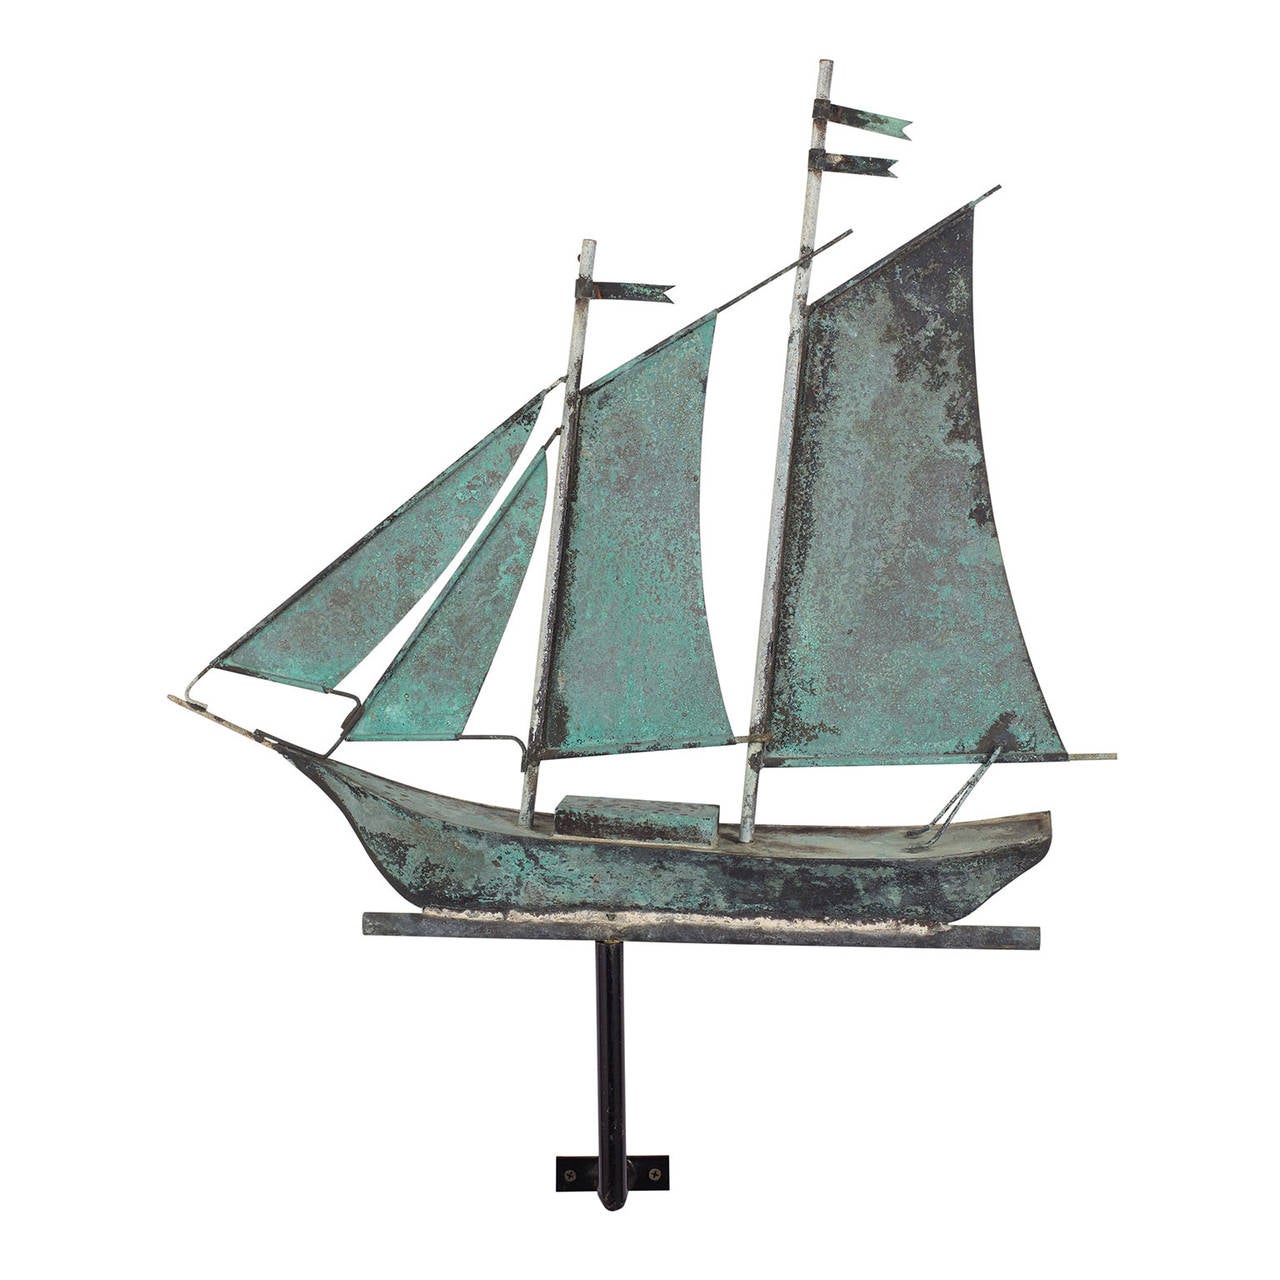 Vintage copper sailing ship weathervane with good verdigris surface in original condition. Includes wall fixture for mounting.